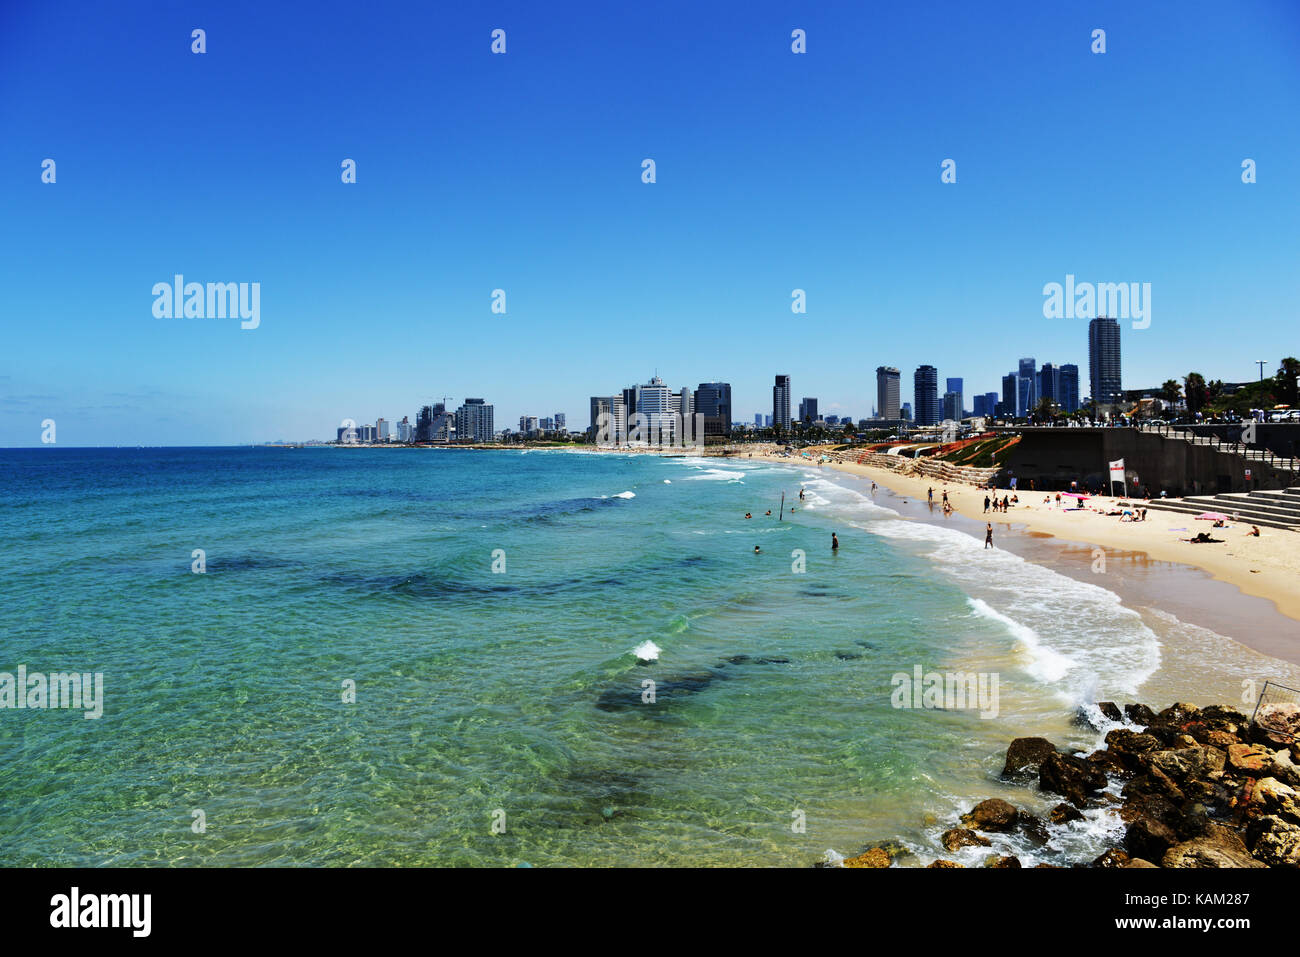 A view of Tel-Aviv seafront from the southern part of the city. Stock Photo